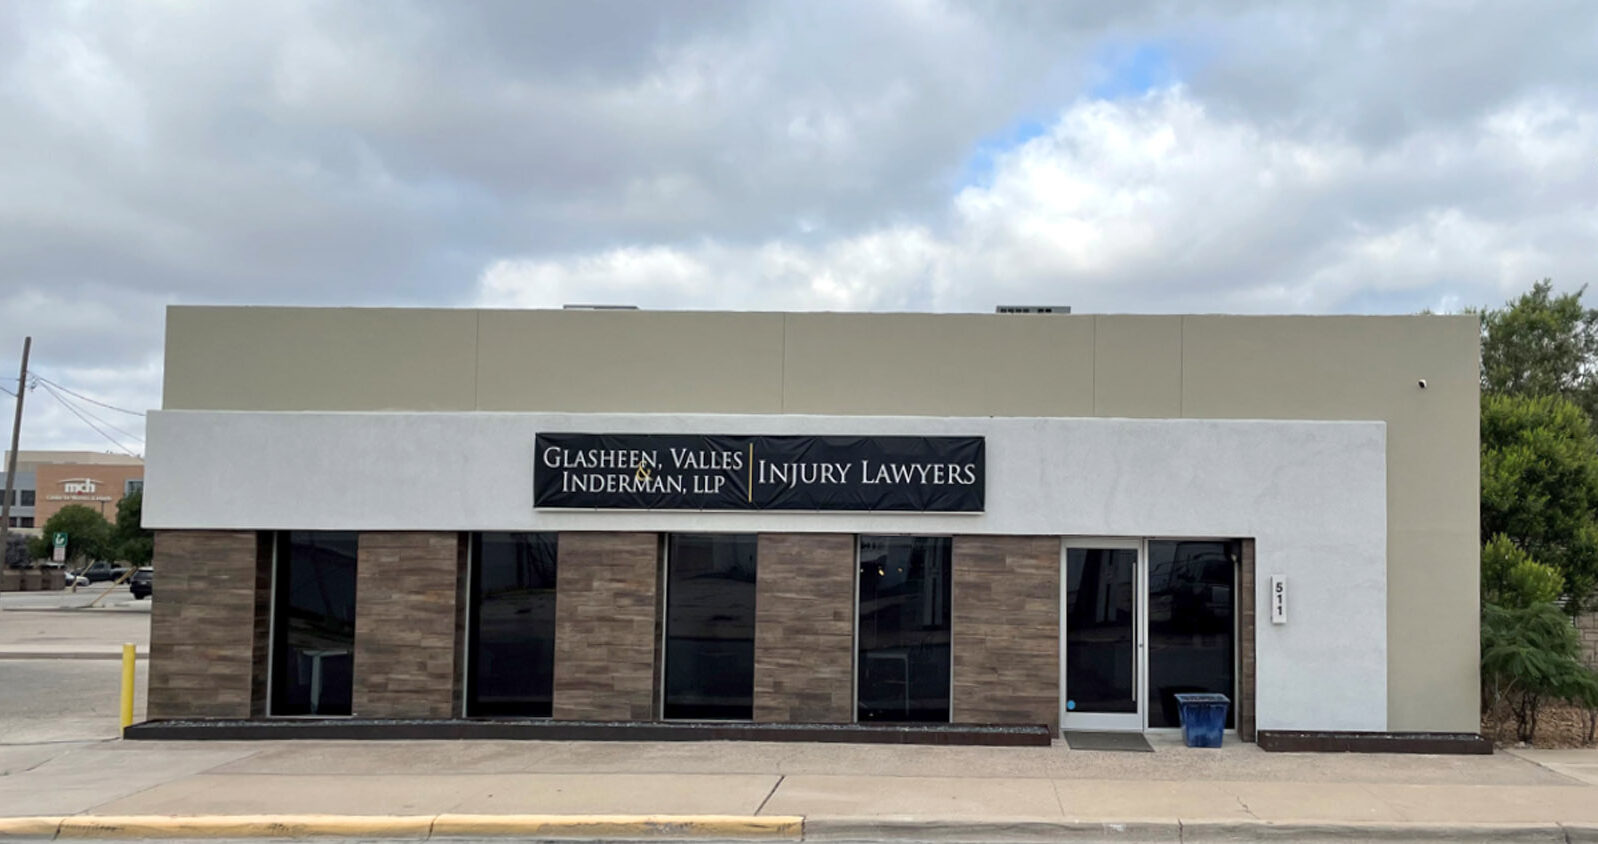 Glasheen Valles & Inderman Injury Lawyers Odessa Office located at 511 N Lincoln Odessa Texas.